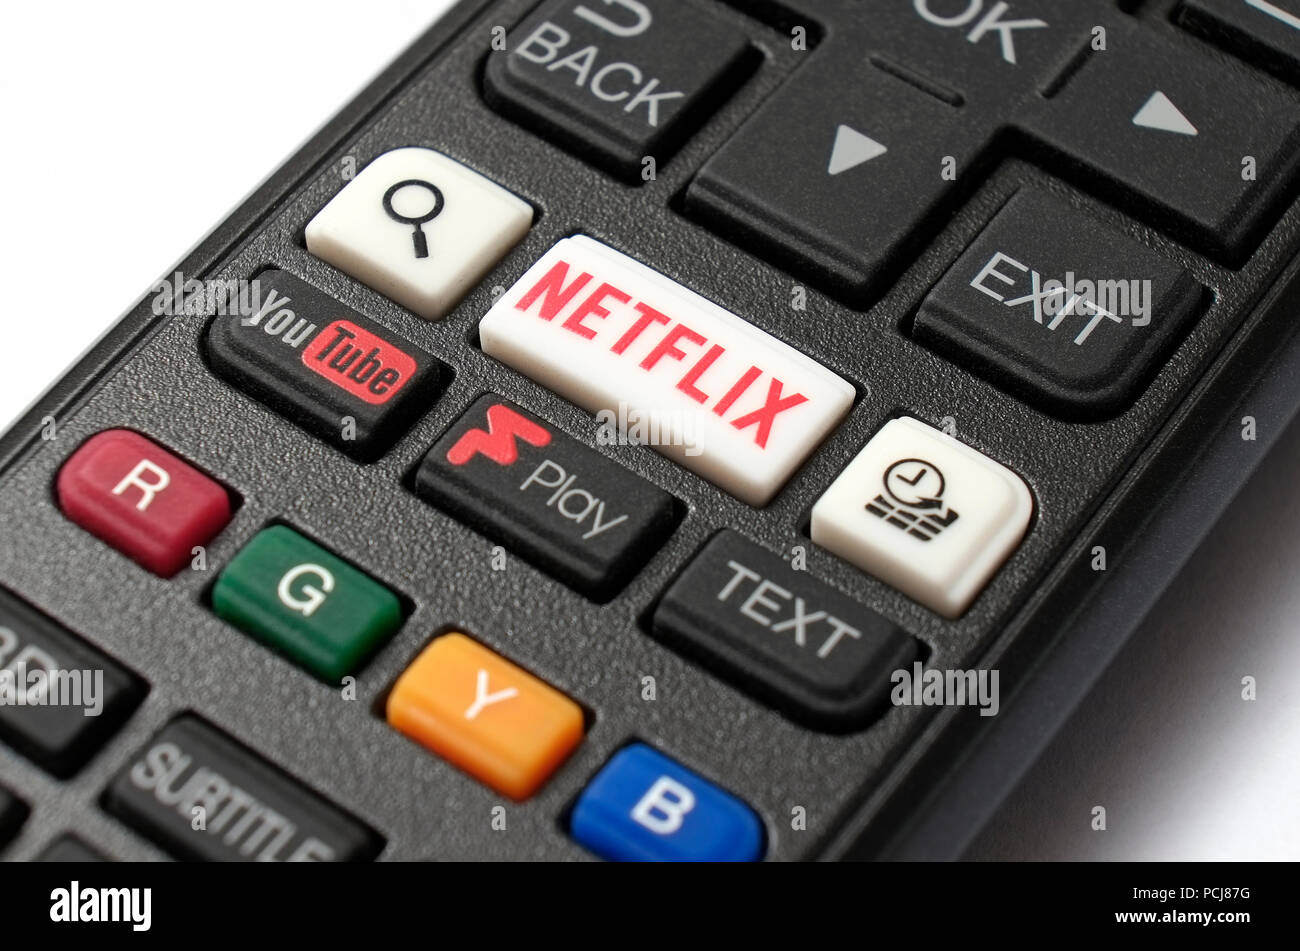 netflix and youtube buttons on television remote tv controller Stock Photo